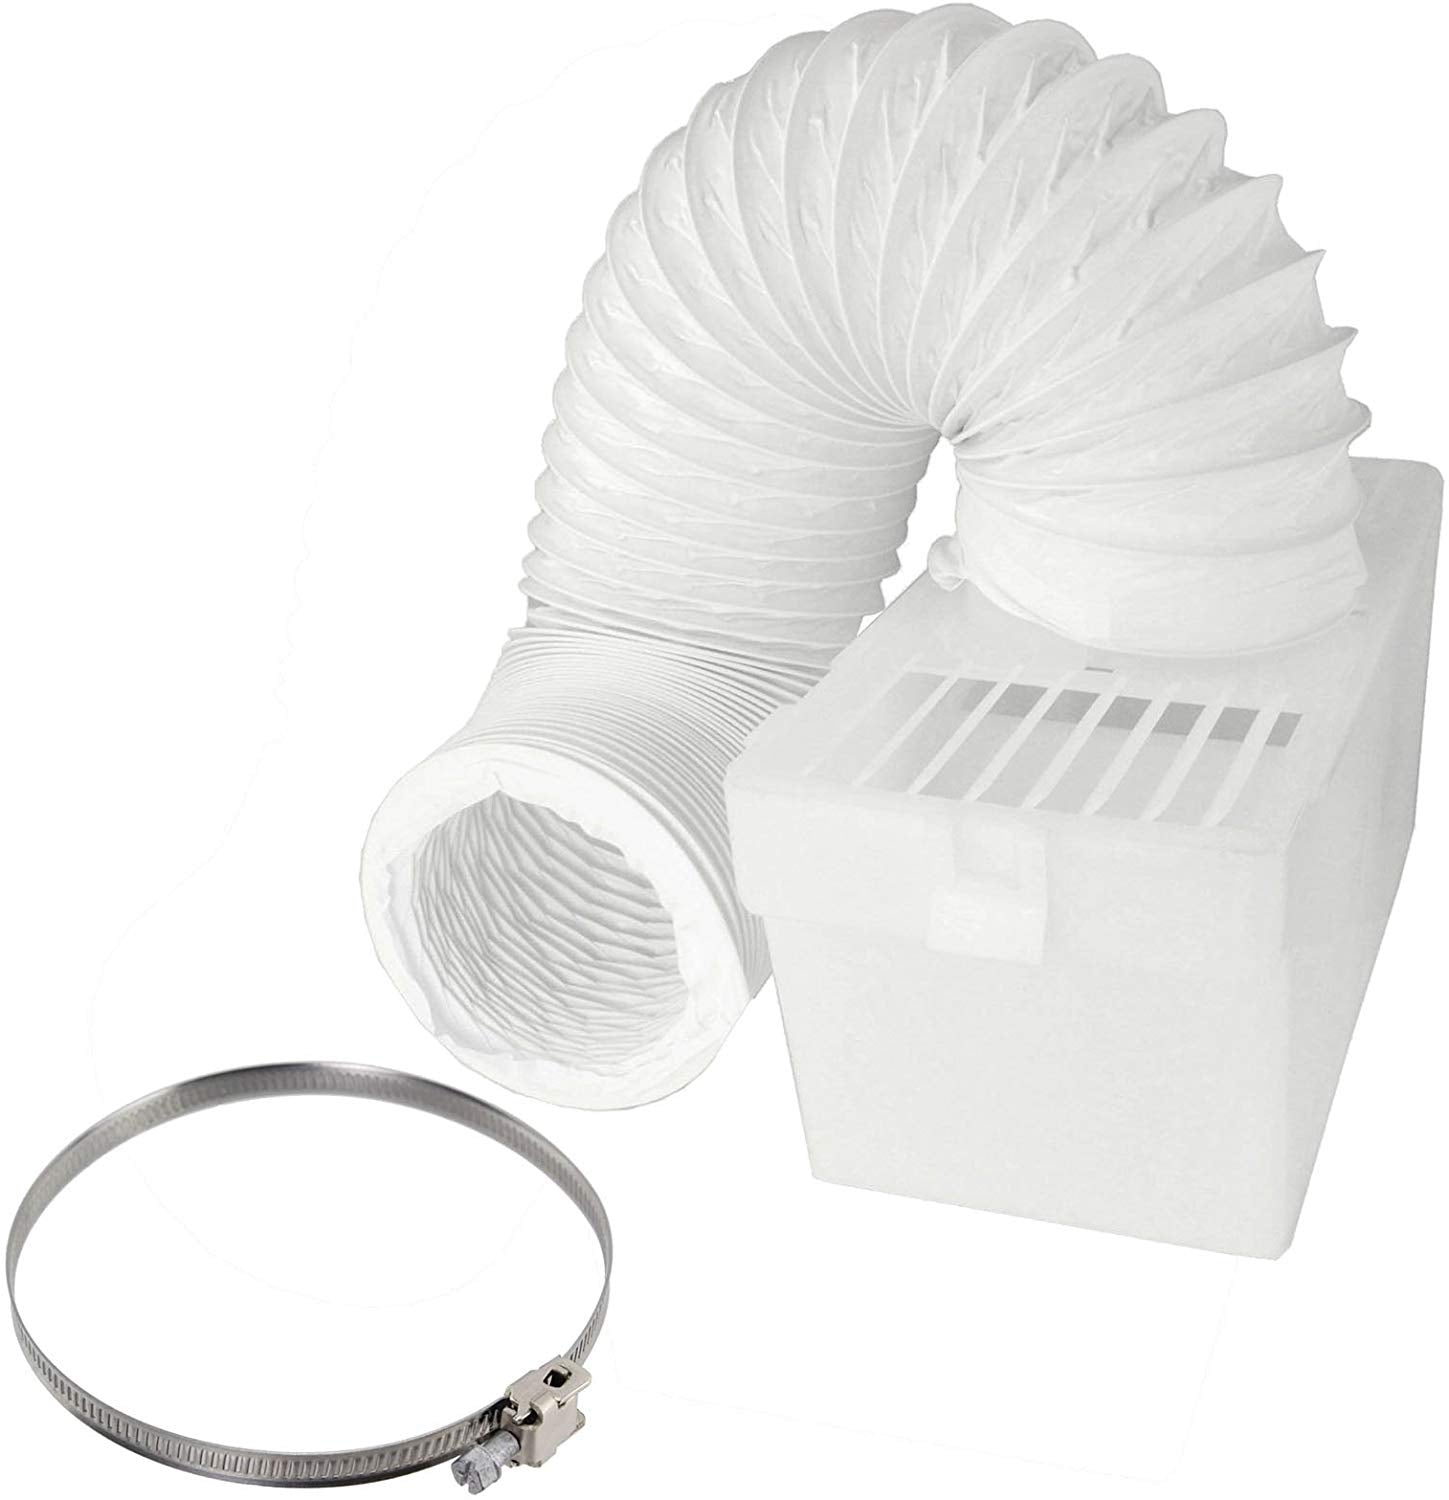 Condenser Vent Box & Hose Kit With Screw Clip for Indesit Vented Tumble Dryer (4" / 100mm Diameter)